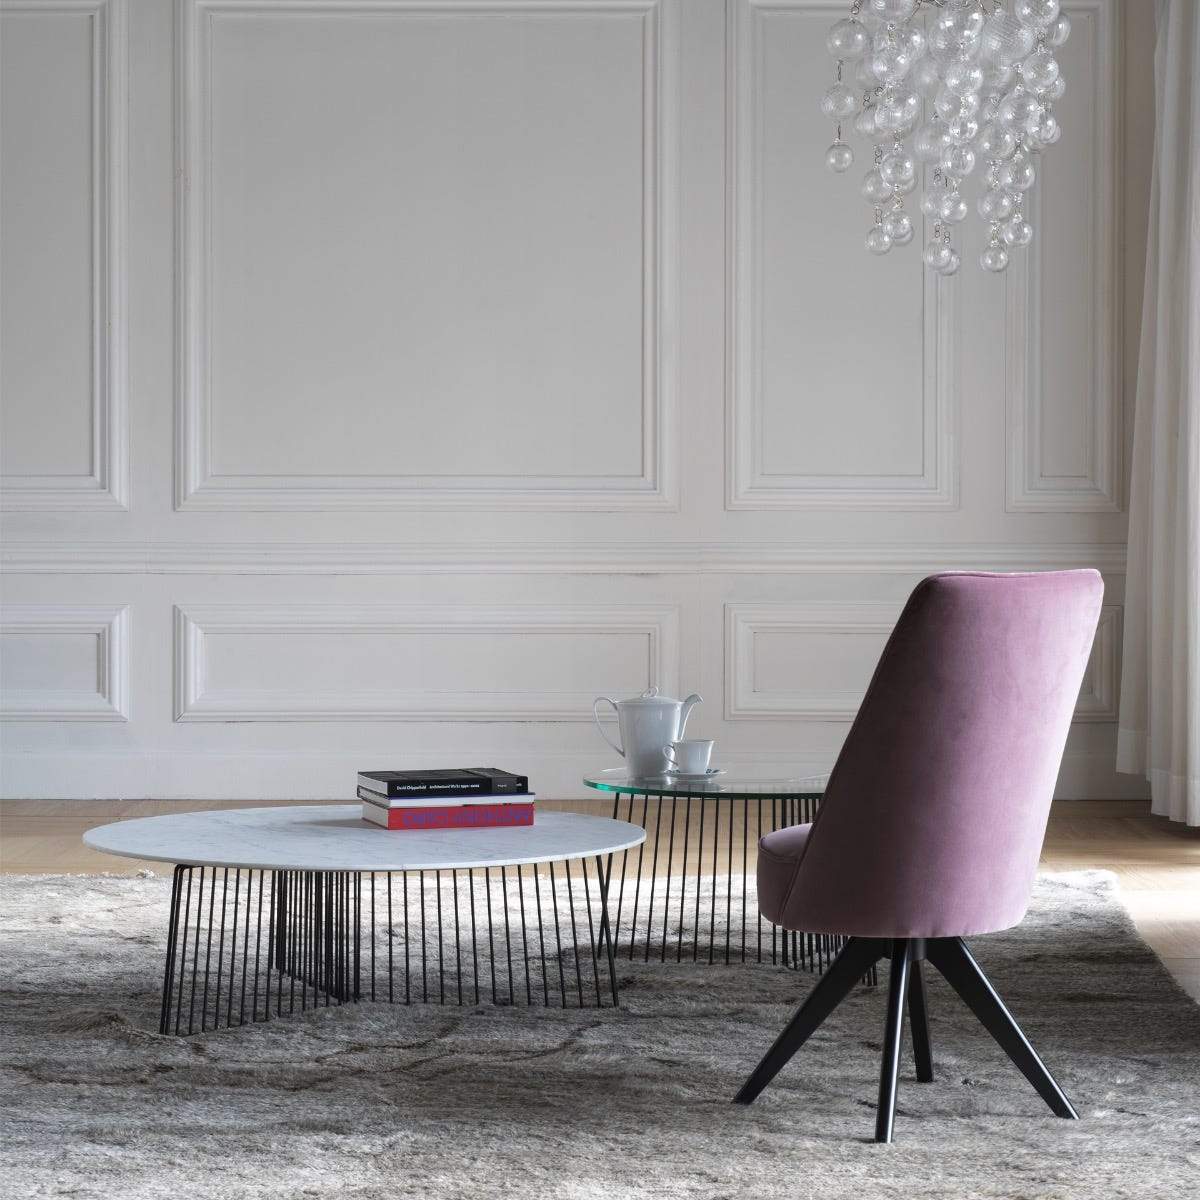 ANAPO by Gordon Guillaumier for Driade - Design Italy